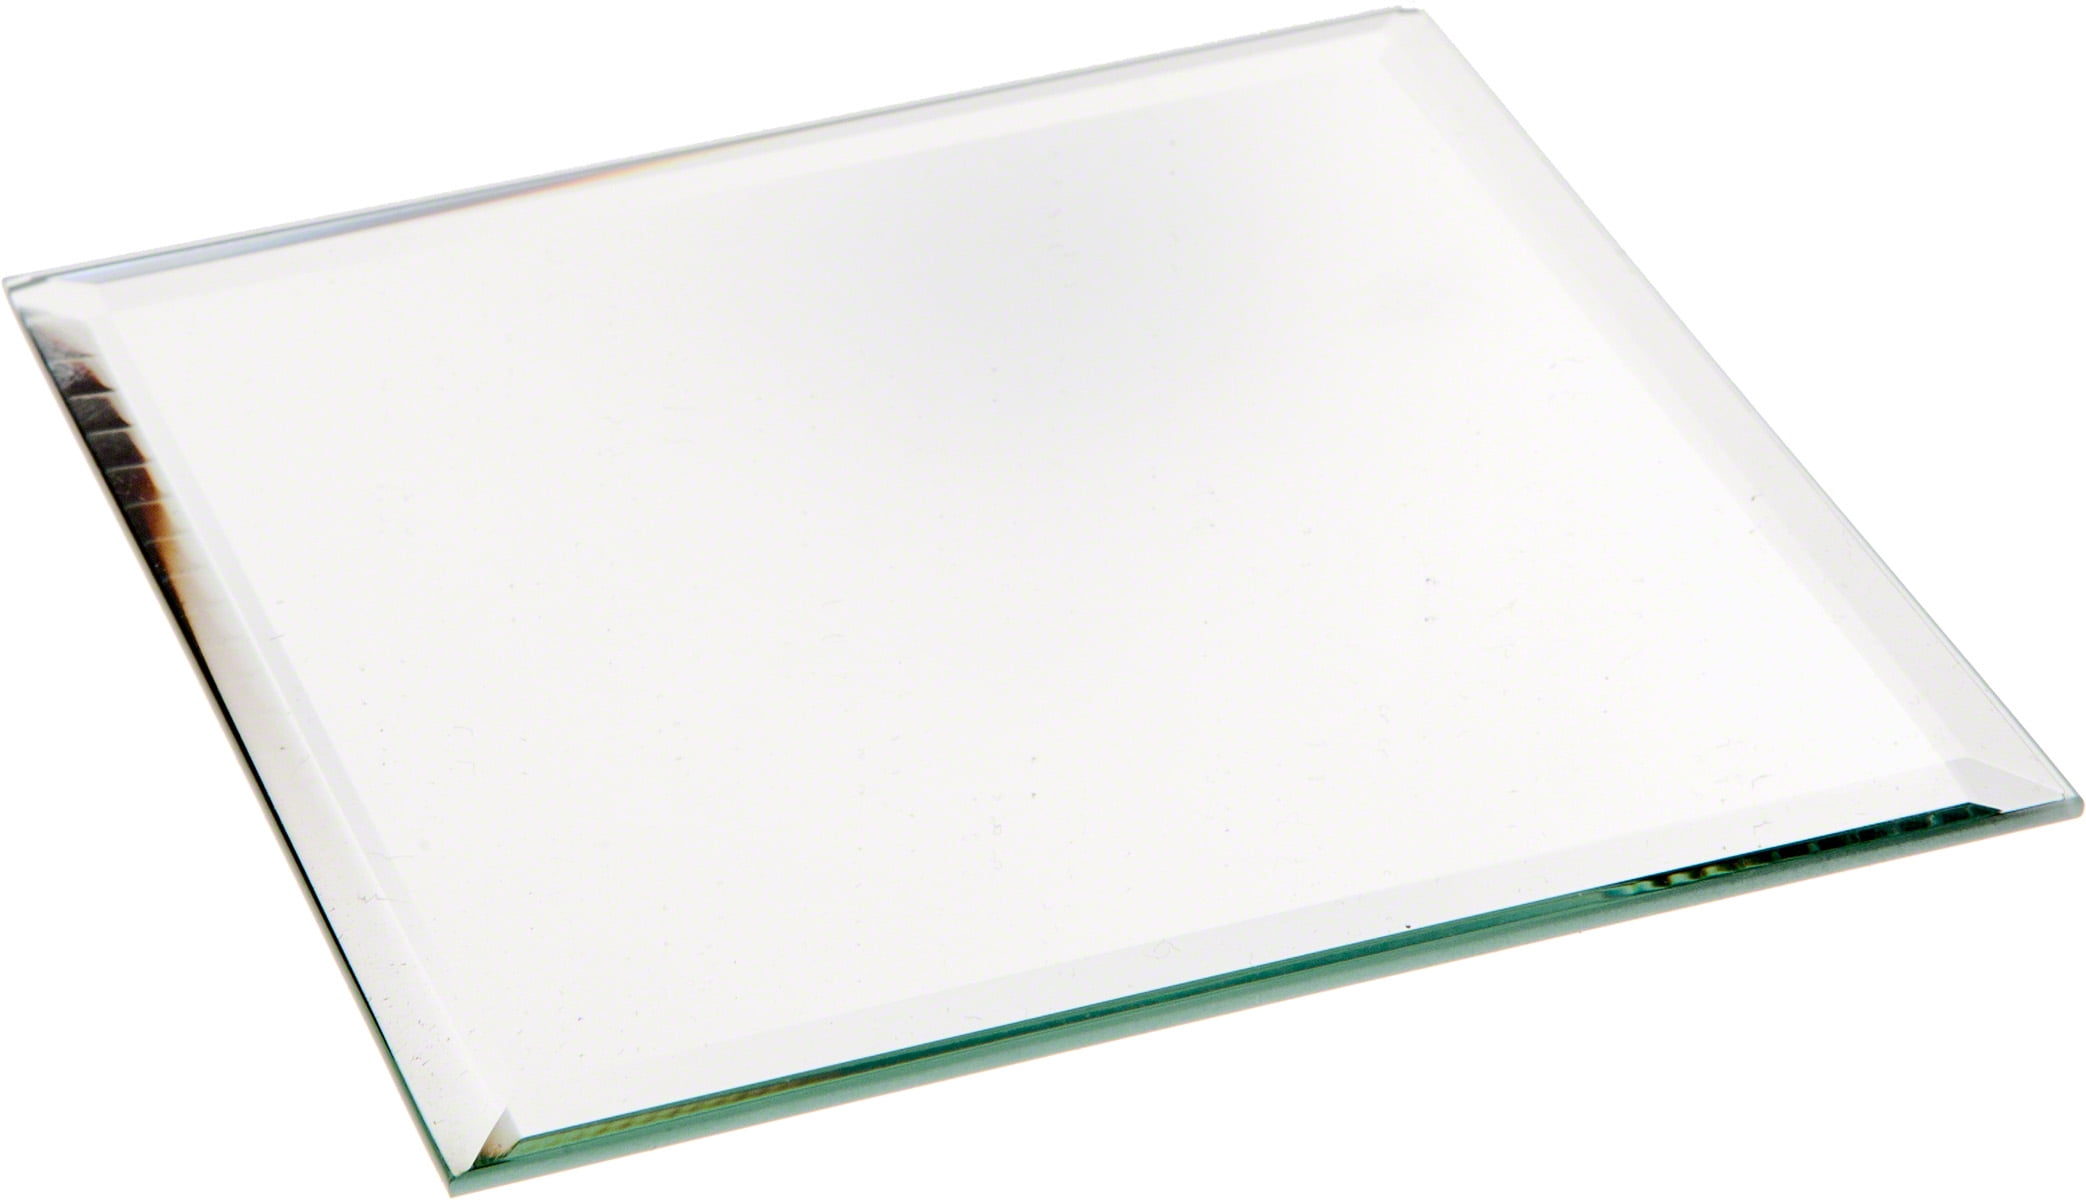 Pack of 12 Plymor Square 3mm Beveled Glass Mirror 2 inch x 2 inch 